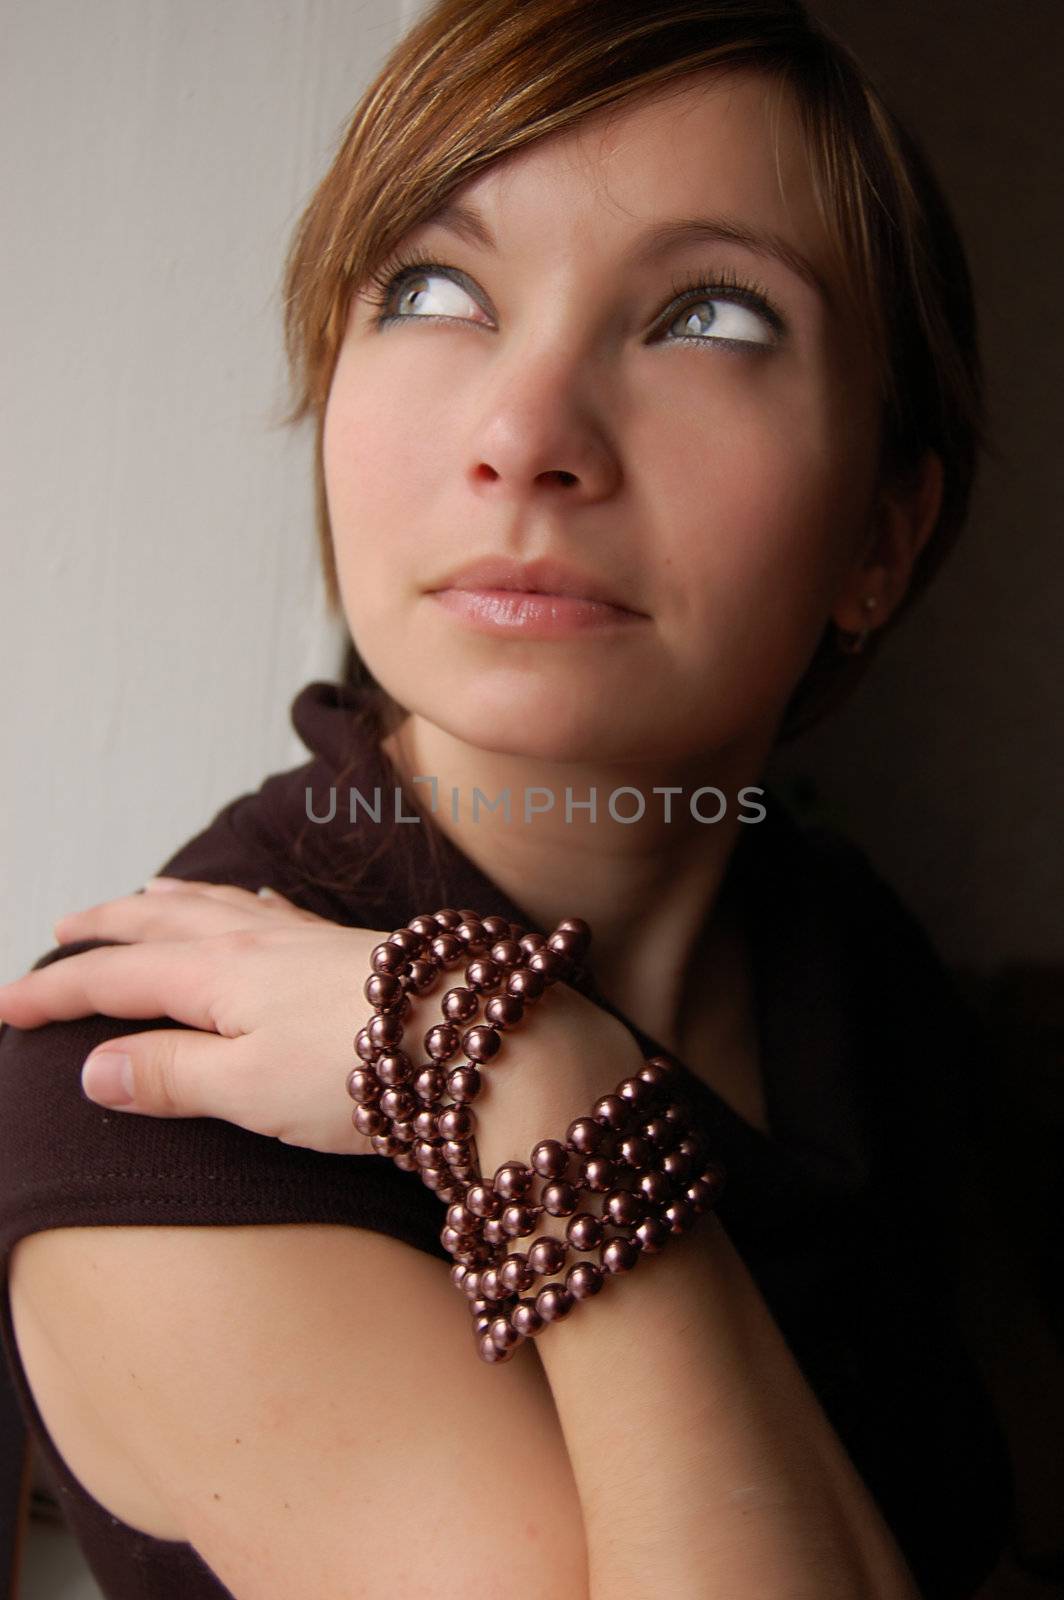 Girl with bracelet looking up